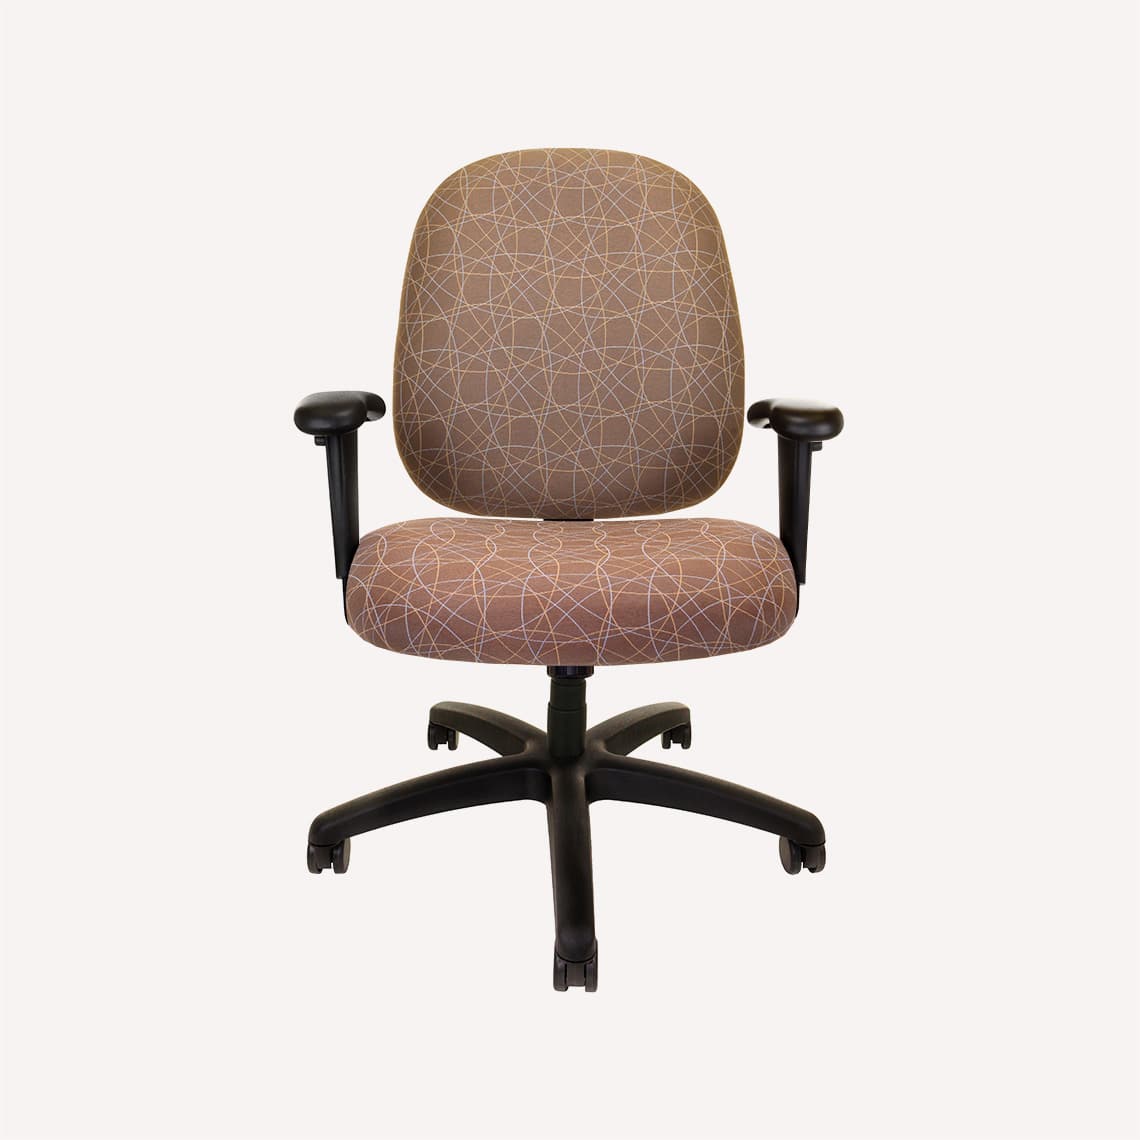 https://www.themodestman.com/wp-content/uploads/2021/06/Pronto-Chair-Petite-Front.jpg